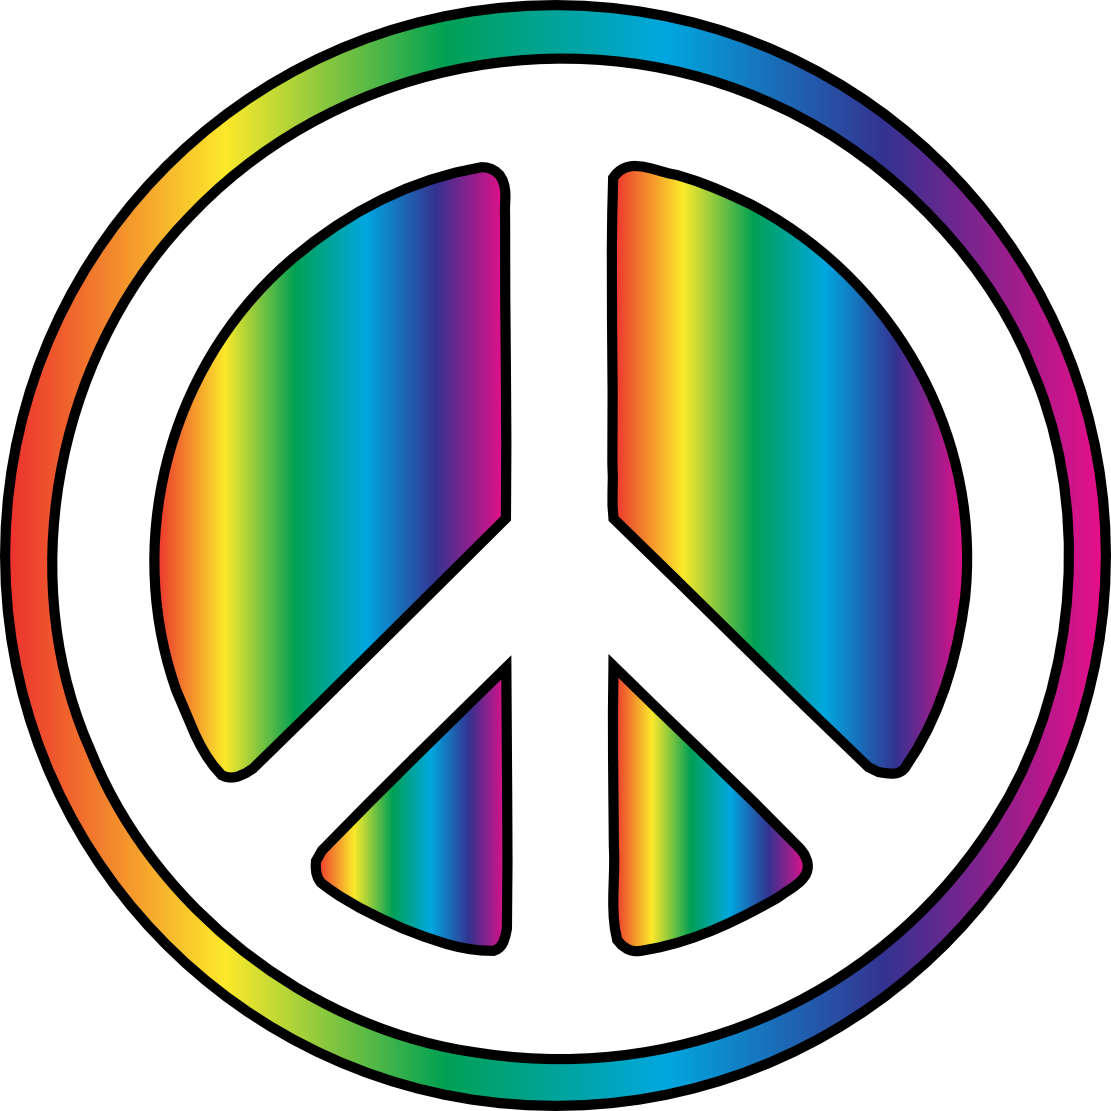 Clip Arts Related To : Hippie